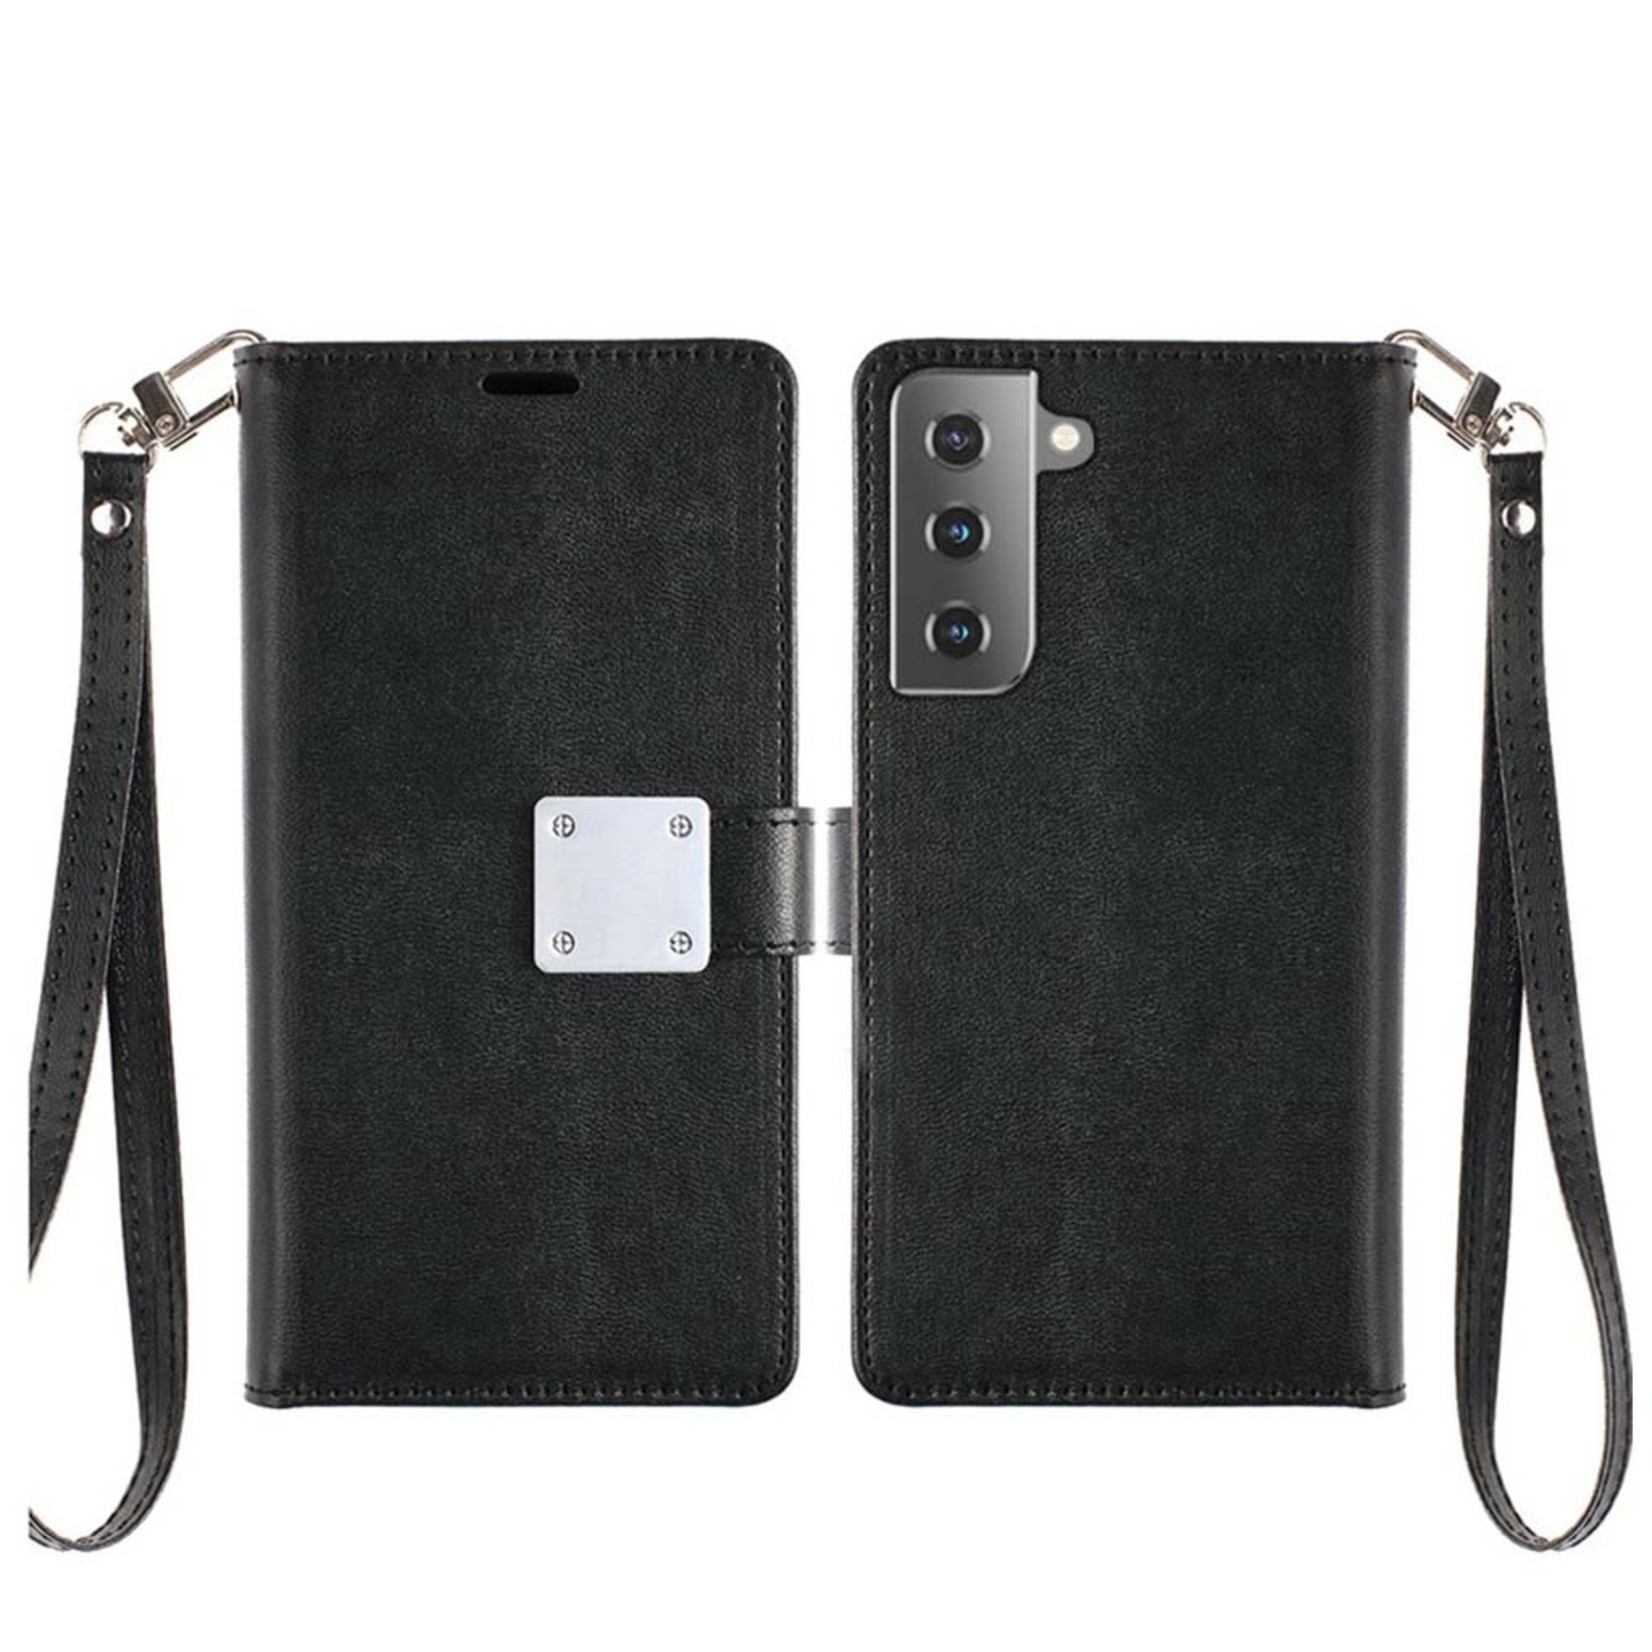 Hybrid PU Leather Metallic Flip Cover Wallet Case with Credit Card Slots for Galaxy S21 Plus